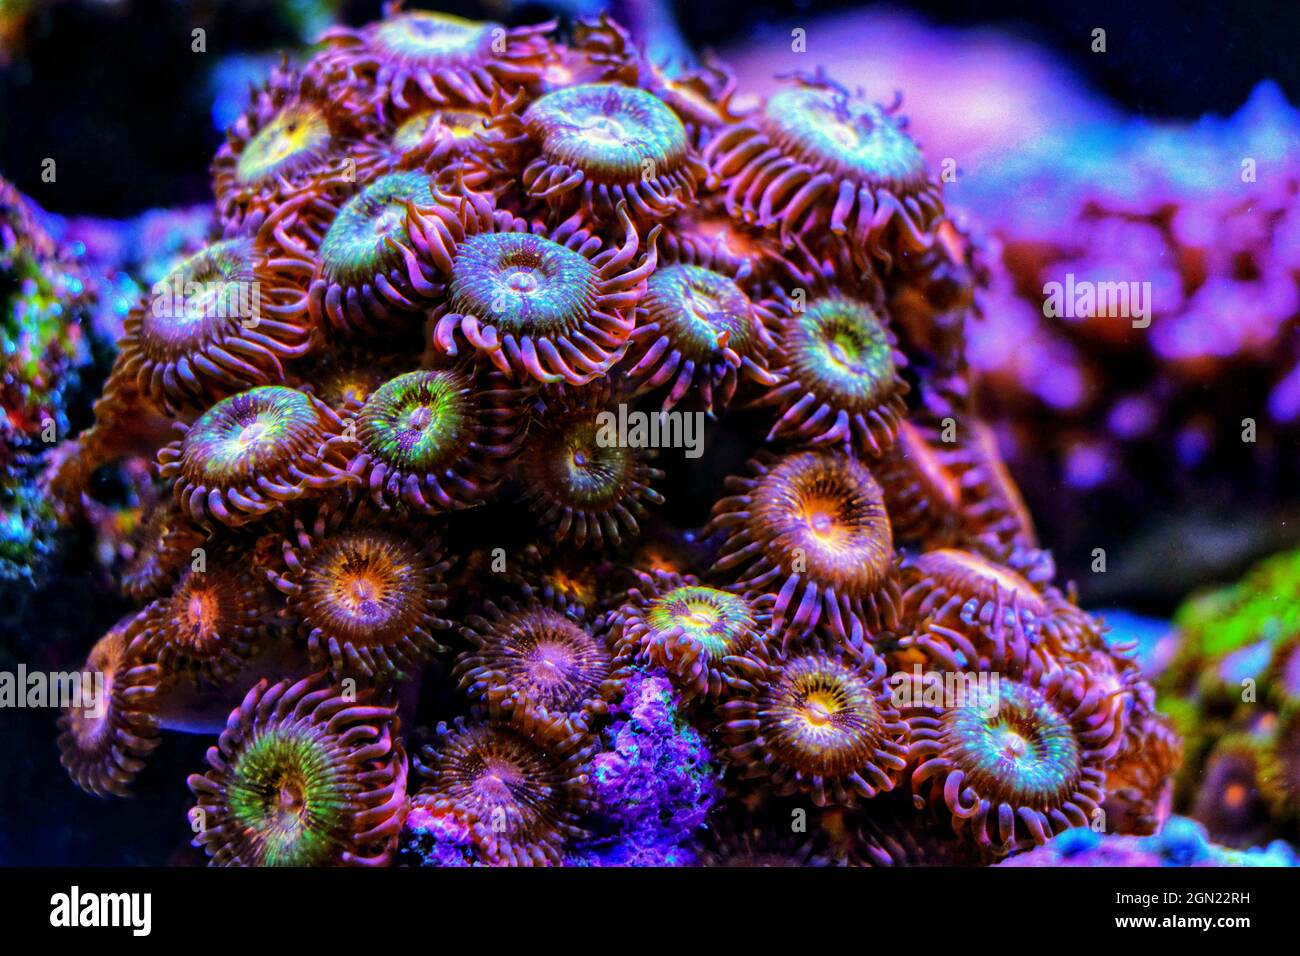 Small colony of Aussie Golden Polyps Zoanthids in coral reef aquarium tank Stock Photo